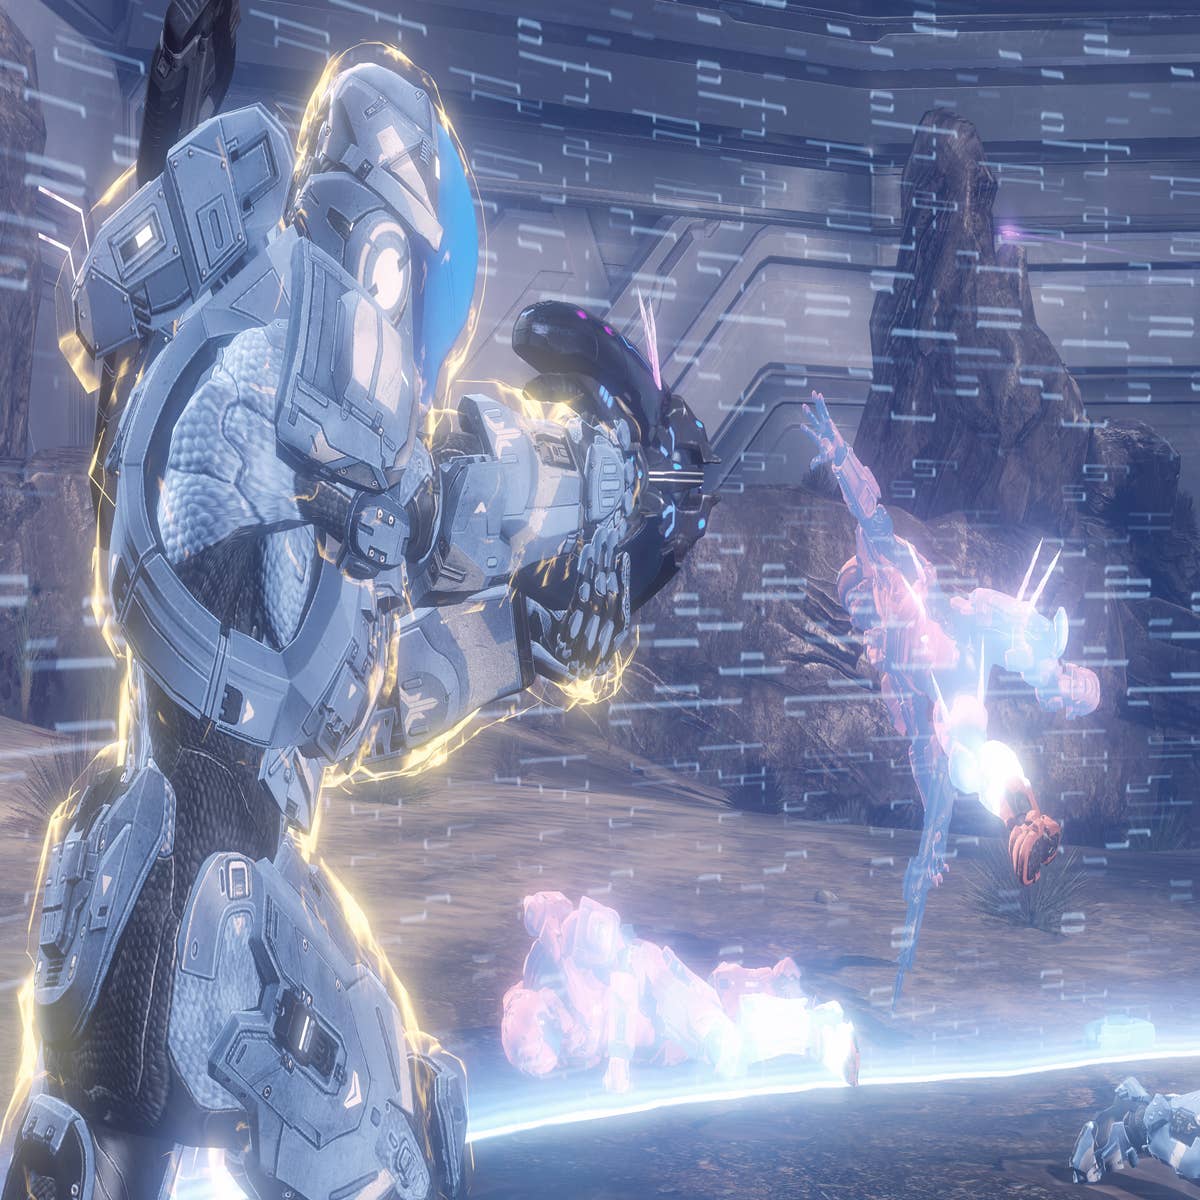 Halo 4 review: the ghost in the machine - Polygon